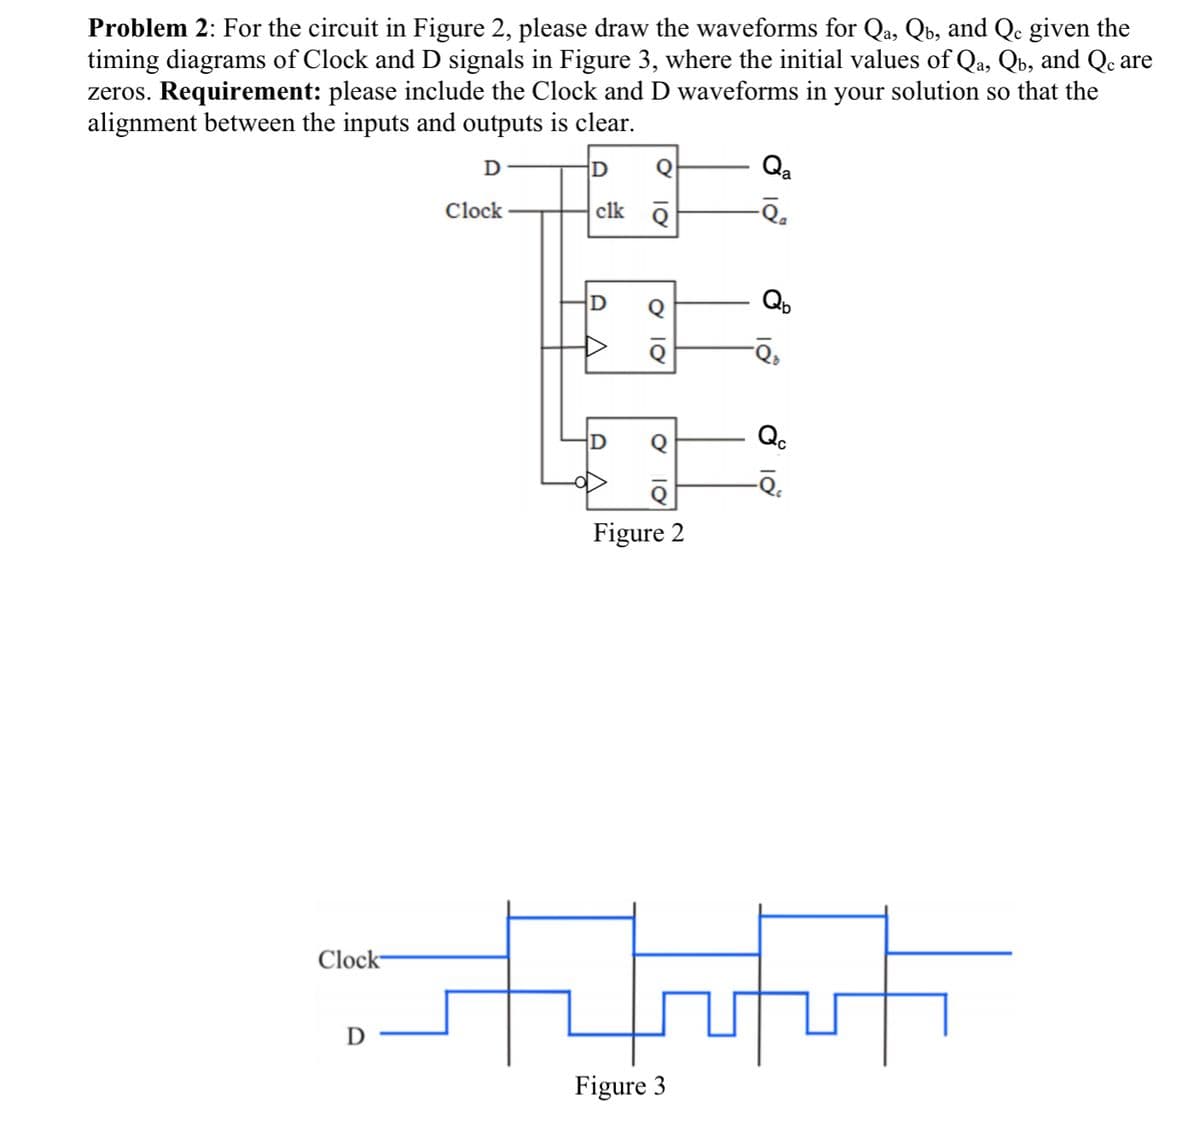 Problem 2: For the circuit in Figure 2, please draw the waveforms for Qa, Qú, and Qe given the
timing diagrams of Clock and D signals in Figure 3, where the initial values of Qa, Qb, and Qc are
zeros. Requirement: please include the Clock and D waveforms in your solution so that the
alignment between the inputs and outputs is clear.
D
D Q
Qa
Clock
clk Q
Clock
D
Ο 10
O
18
10
Qb
-Q₂
D
Figure 2
tytt
Figure 3
Qc
-Q₁